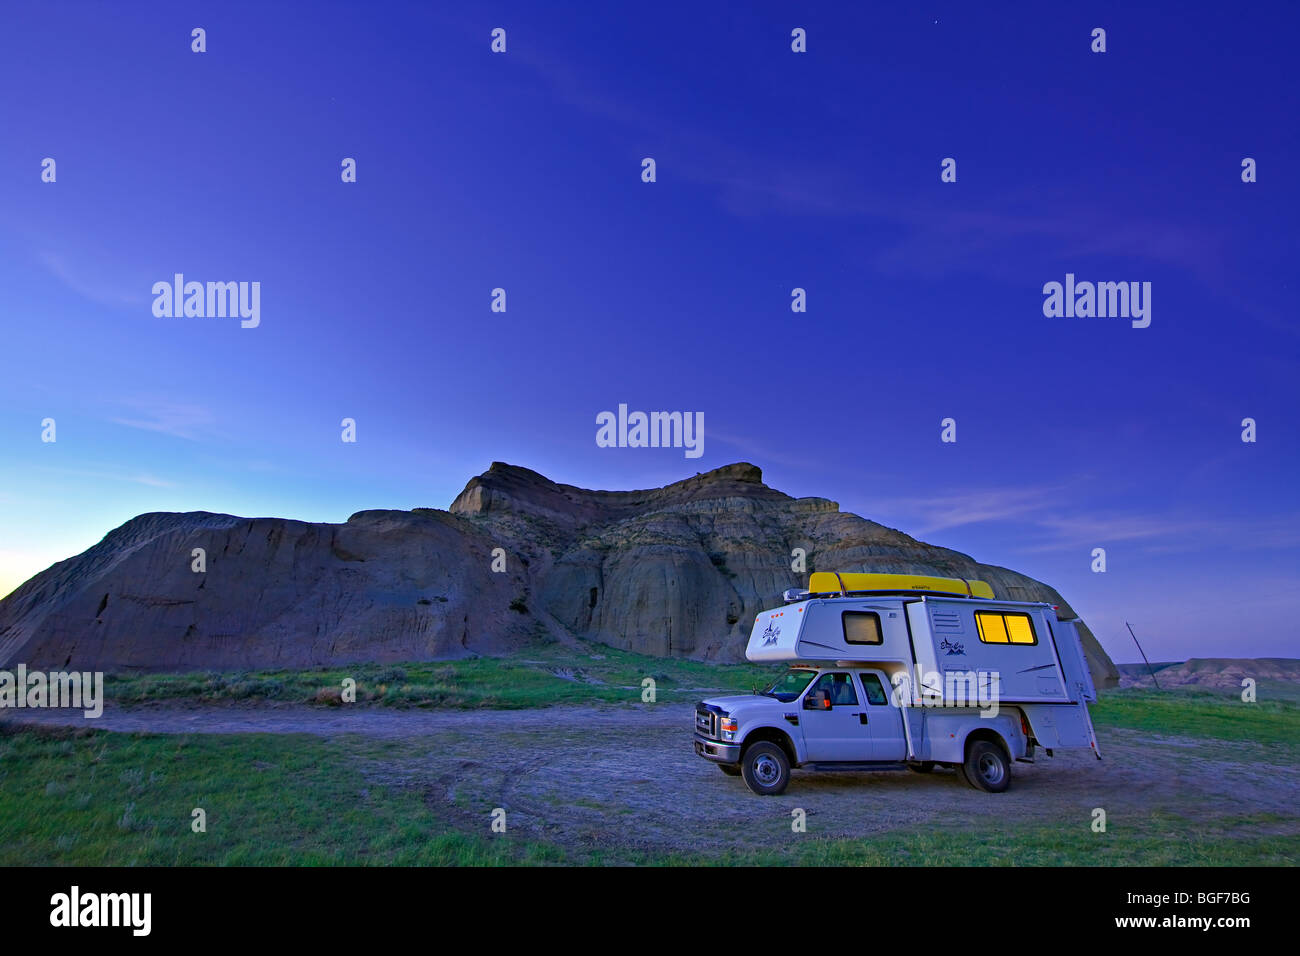 Camper at Castle Butte at dusk in the Big Muddy Badlands of Southern Saskatchewan, Canada. Stock Photo